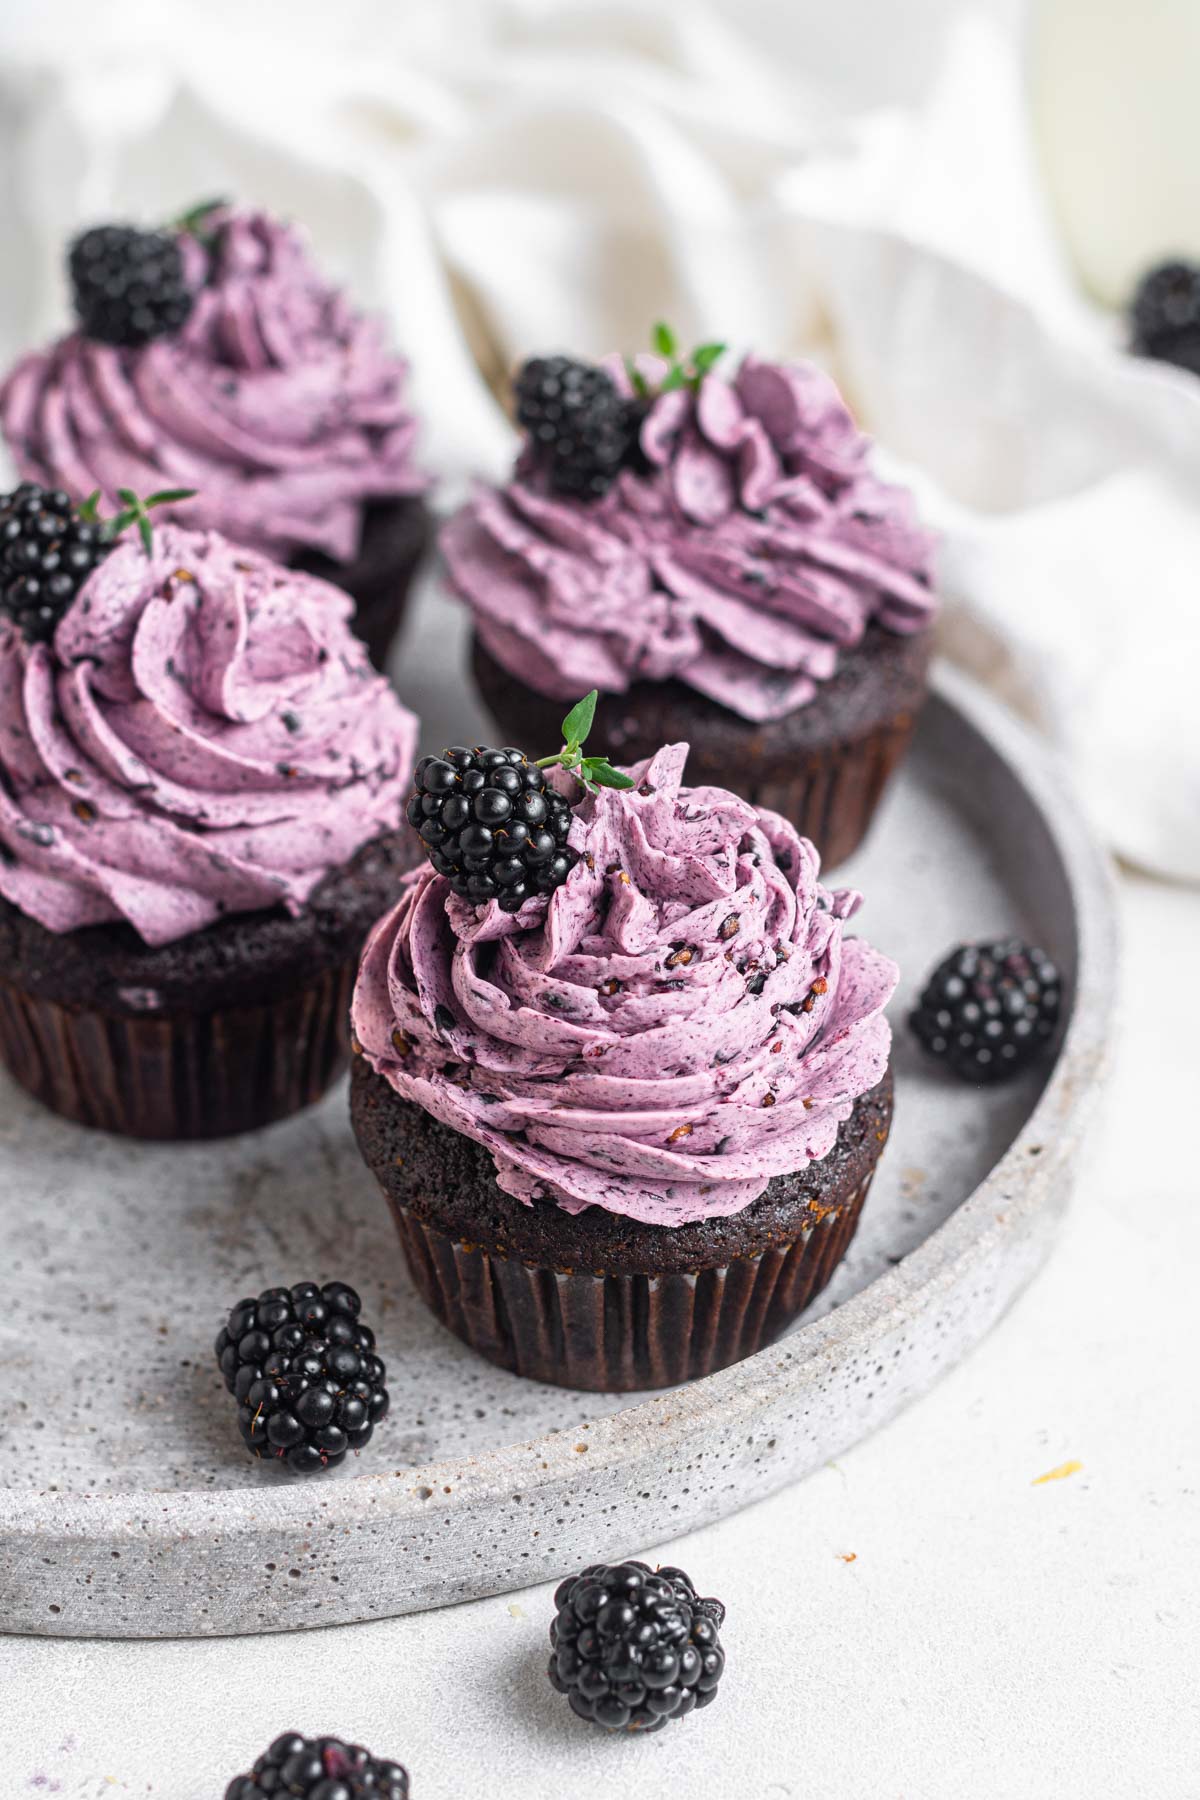 Four chocolate blackberry cupcakes on a white plate.